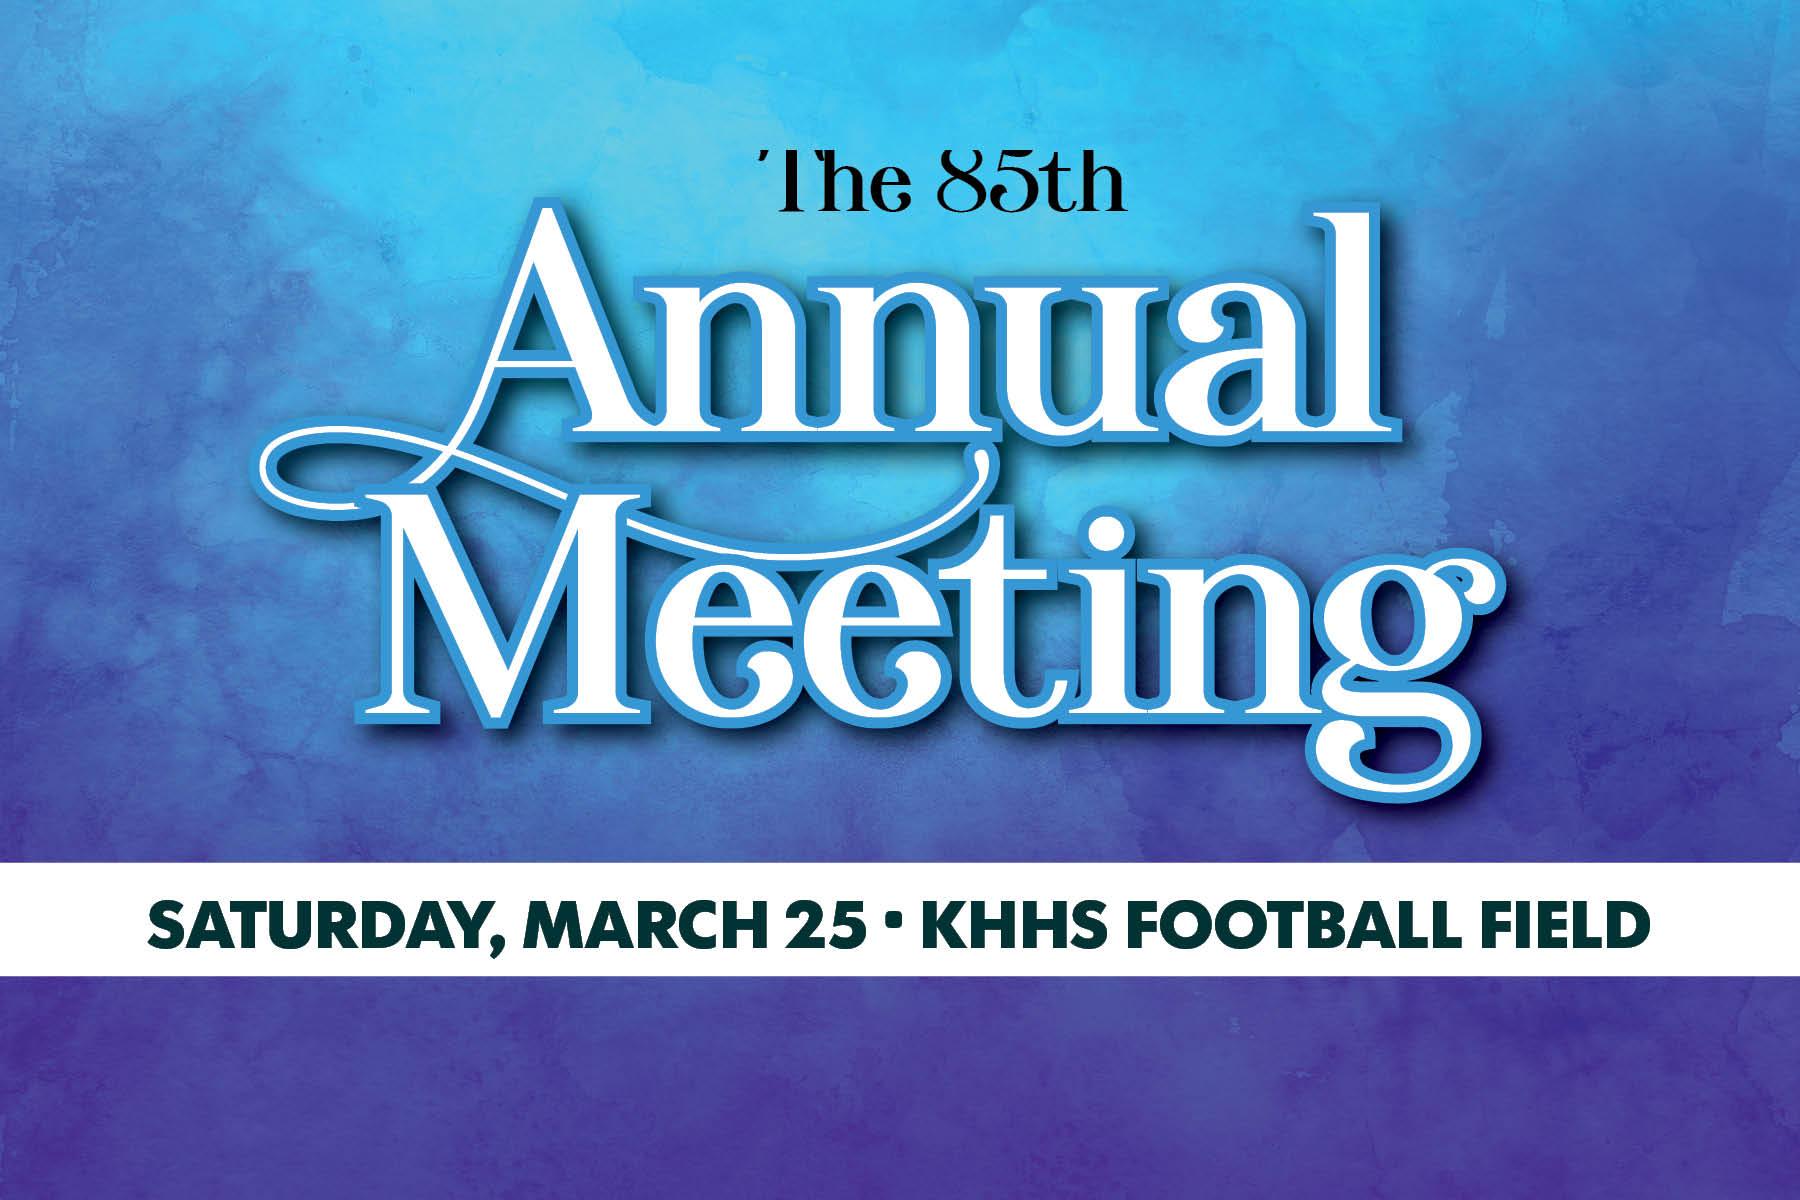 85th Annual Meeting is March 25